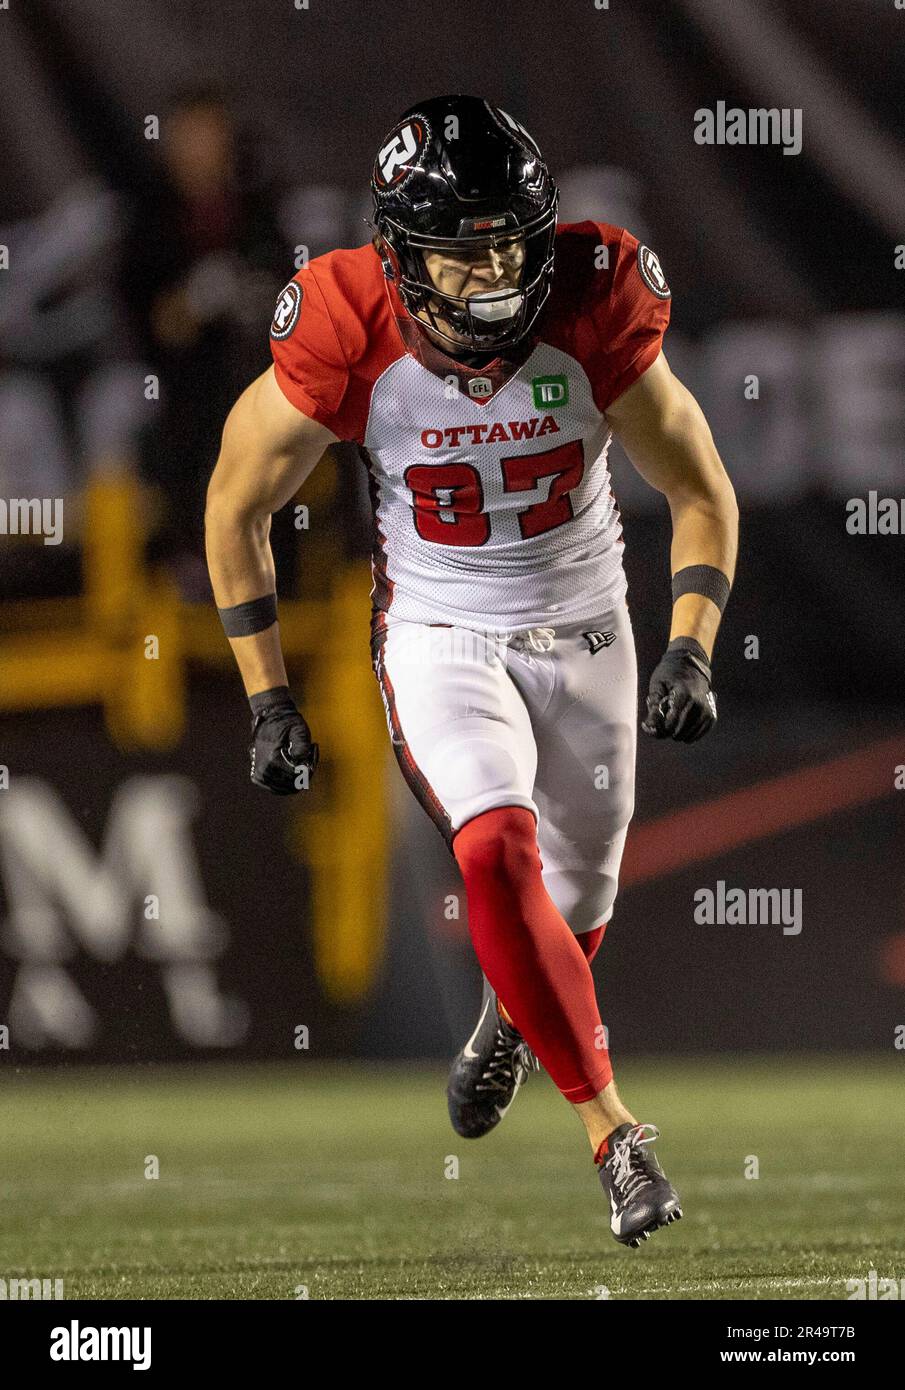 Ottawa, Canada. 26 May 2023.  Keaton Bruggeling (87) of the Ottawa Redblacks in the Canadian Football League preseason game between the Ottawa Redblacks and the visiting Montreal Alouettes. The Alouettes won the game 22-21. Copyright 2023 Sean Burges / Mundo Sport Images / Alamy Live news Stock Photo